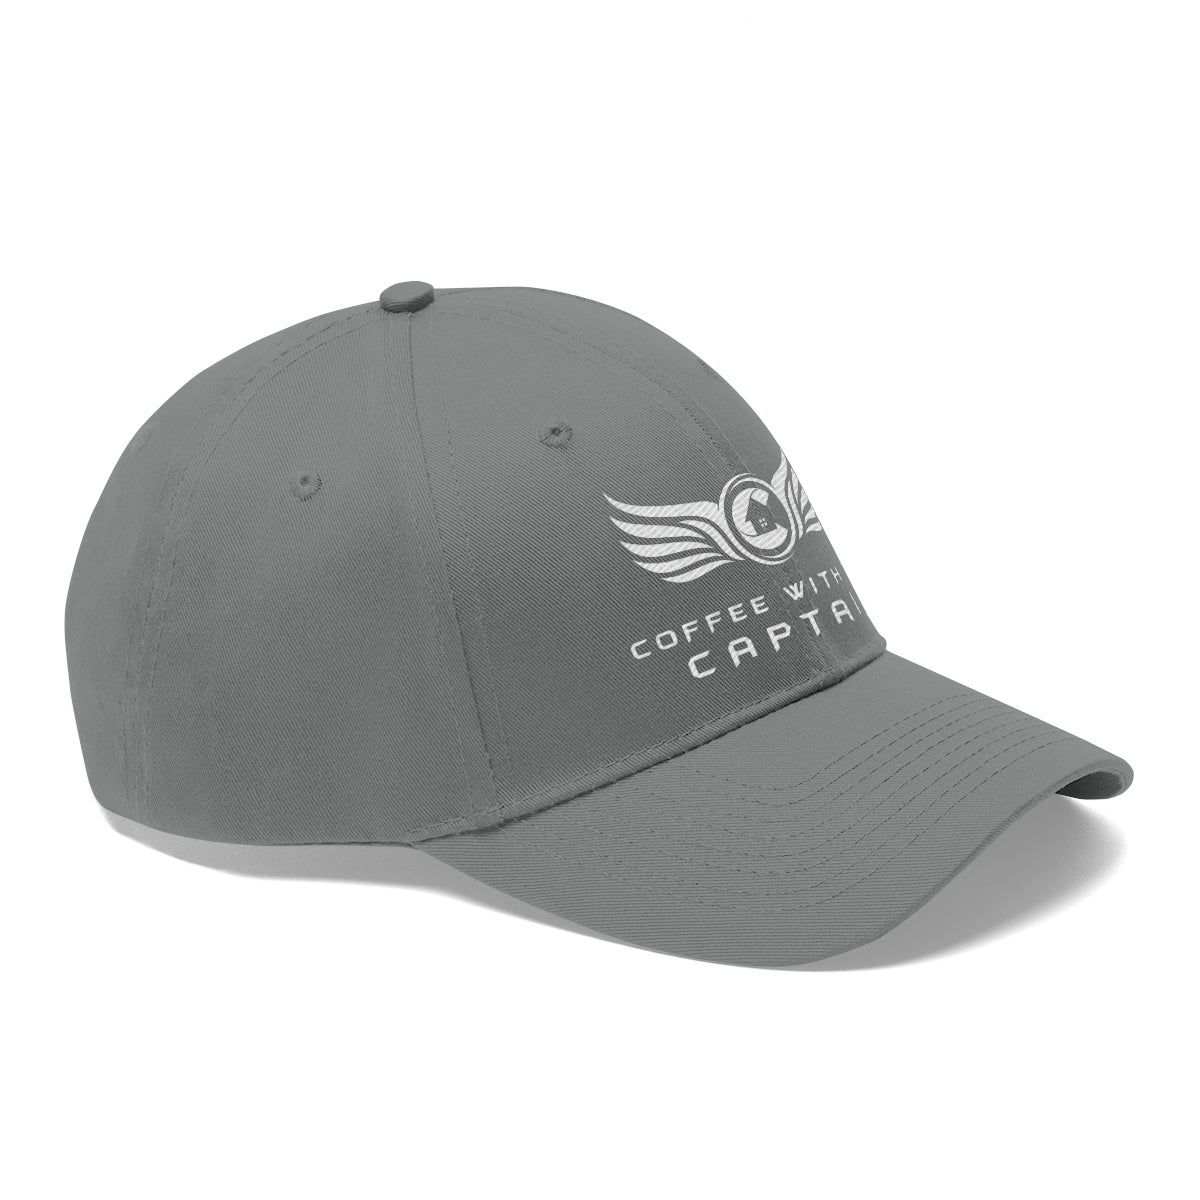 CWTC Twill Hat - Several Color Options!